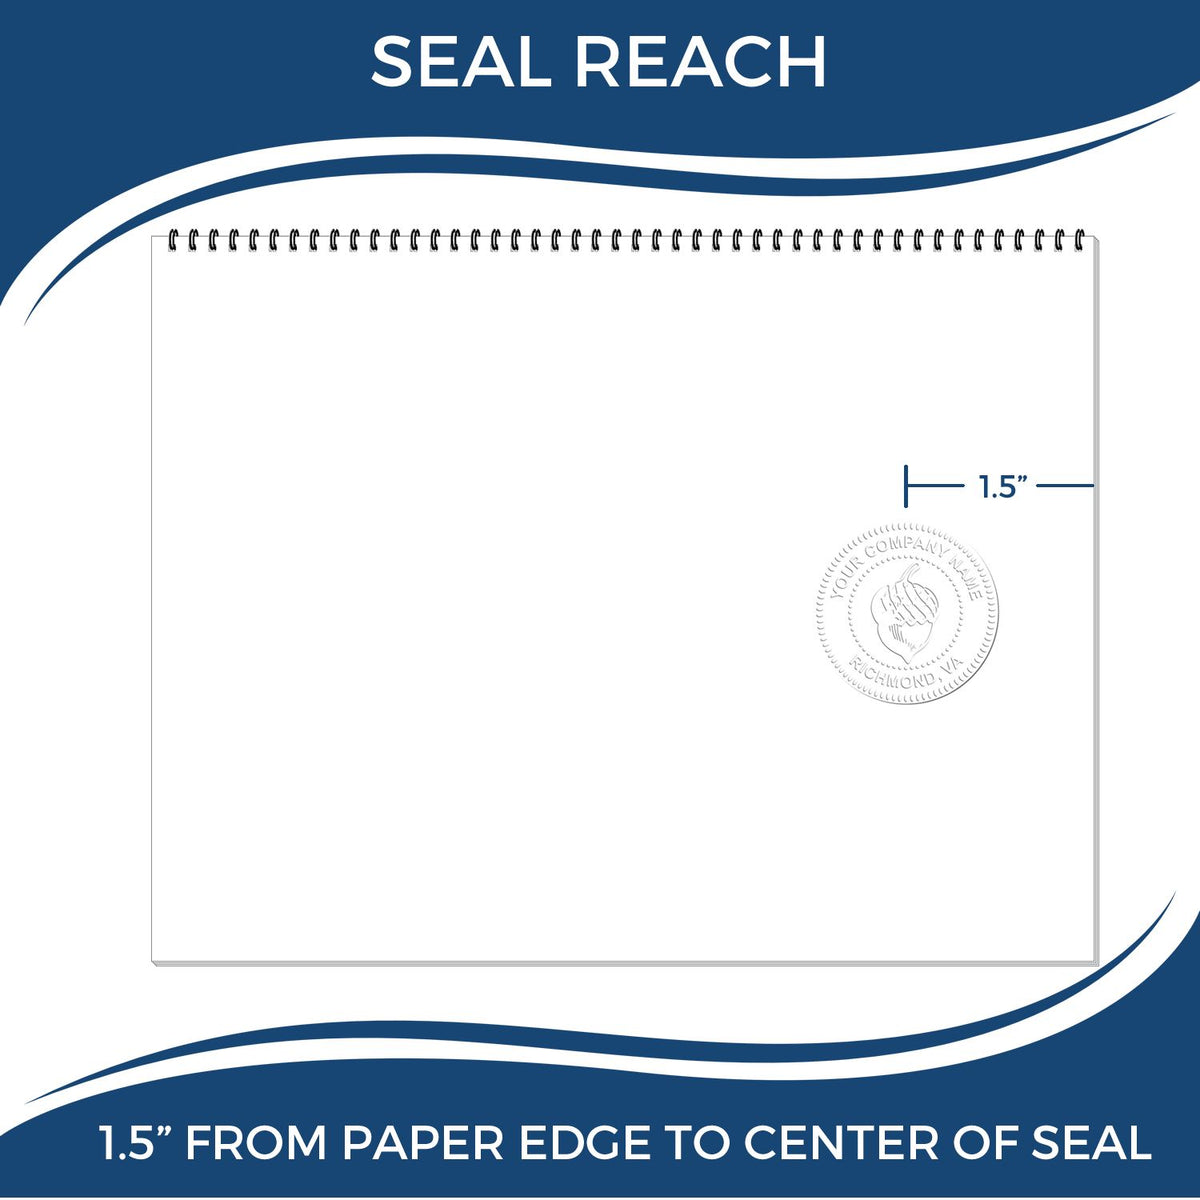 An infographic showing the seal reach which is represented by a ruler and a miniature seal image of the Handheld Arkansas Professional Engineer Embosser